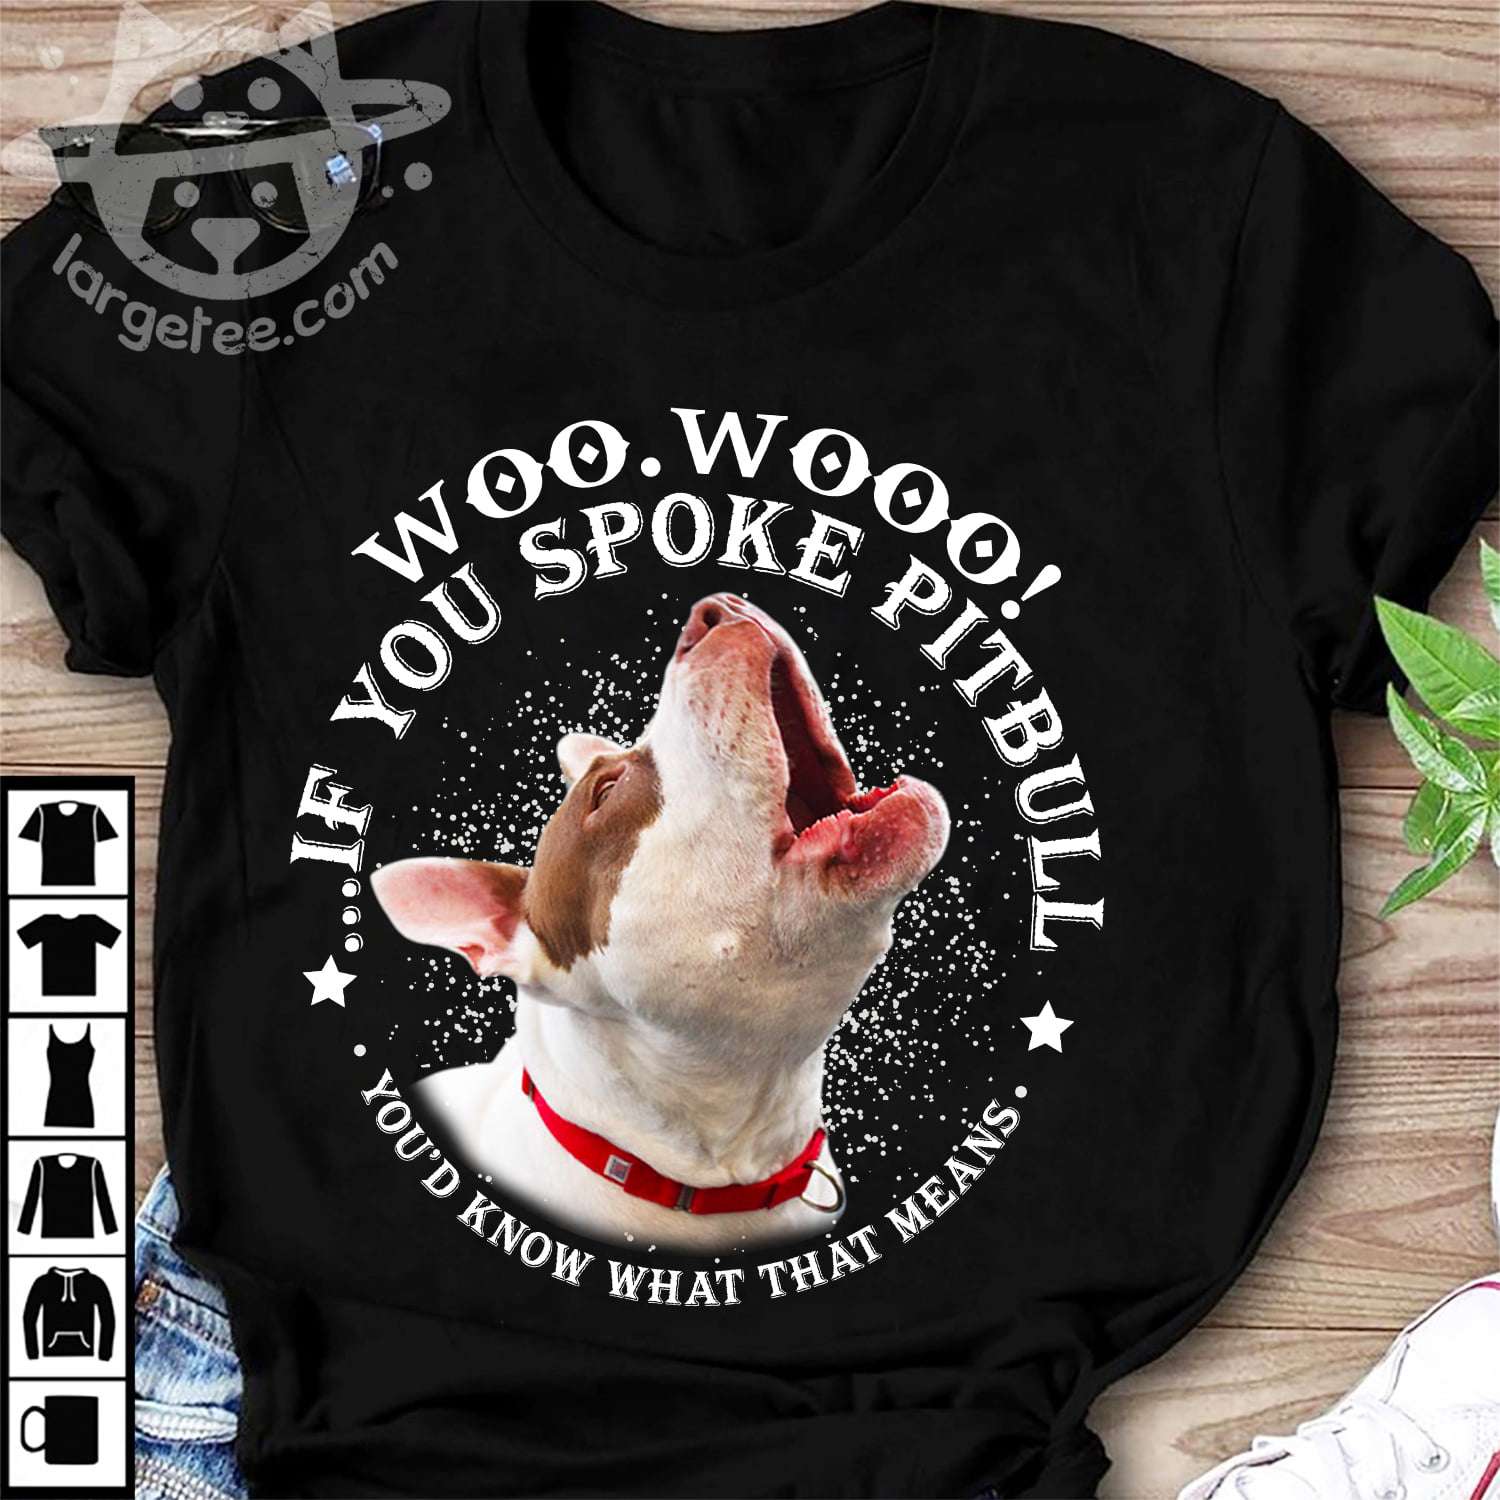 Pitbull Dog - Woo Wooo If you spoke pitbull you'd know what that means